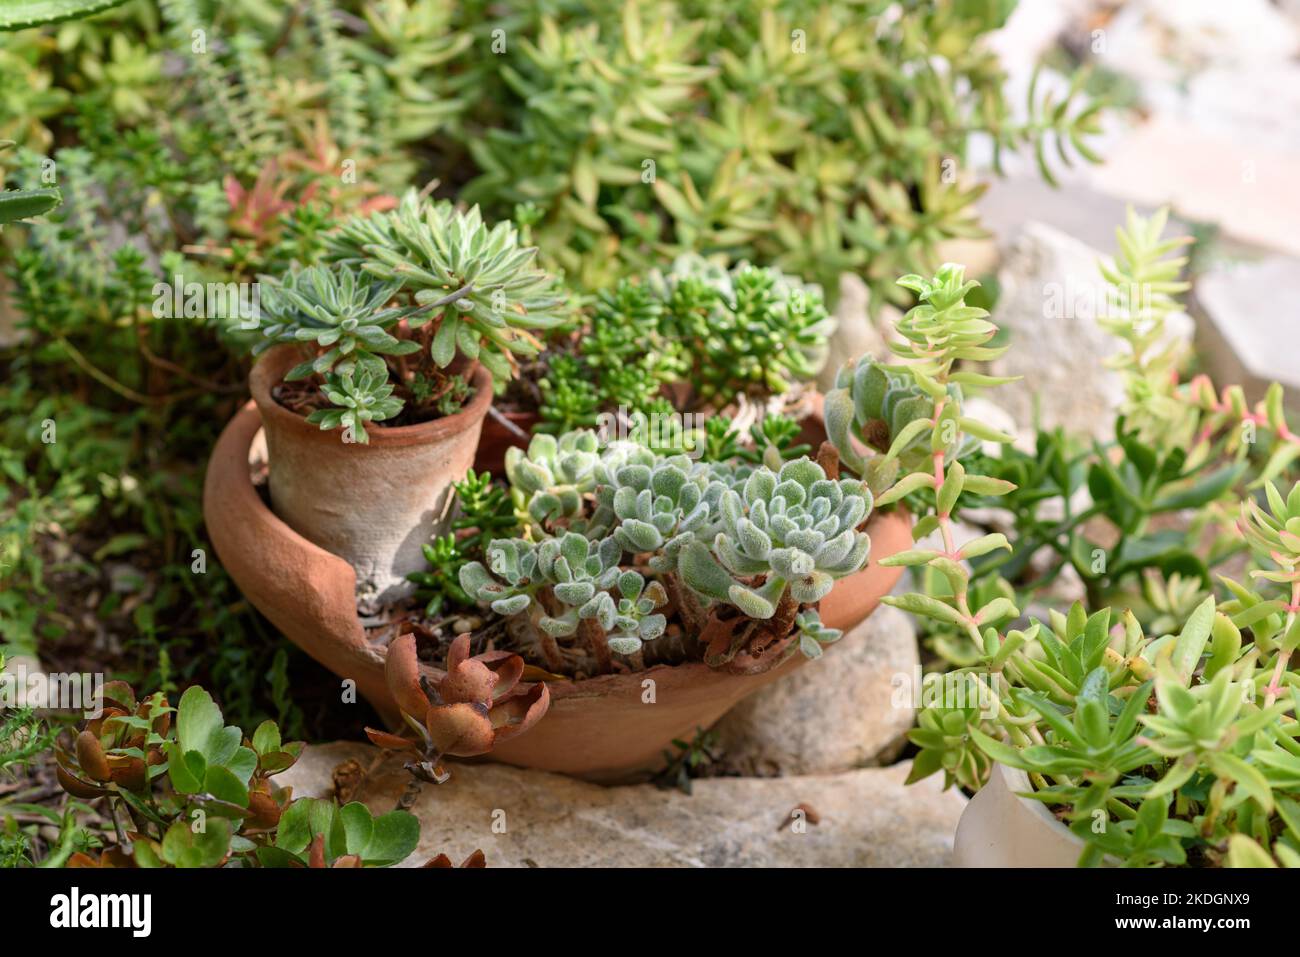 Succulents Planted In Terra Cotta Pots. Potted Succulent Plants In A Garden. Stock Photo